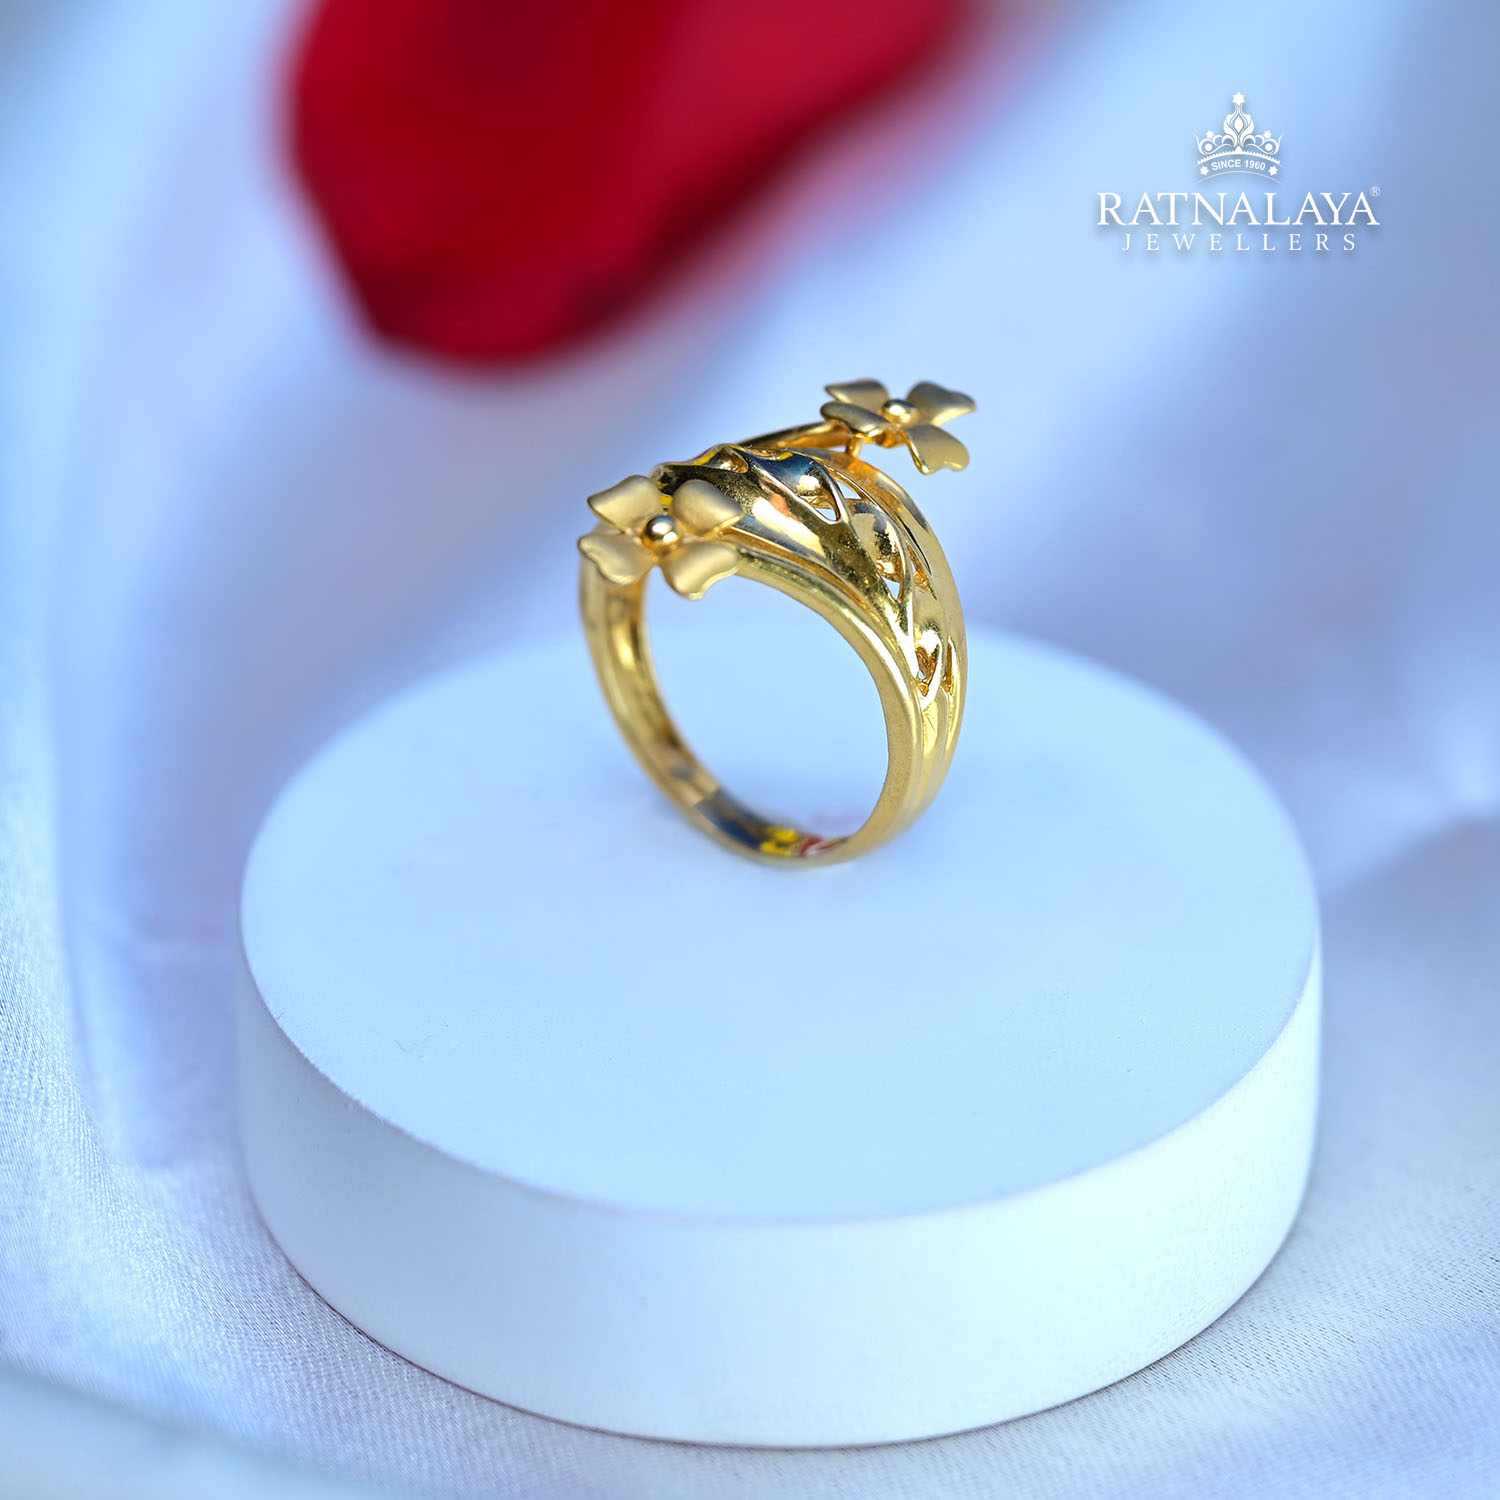 1.78 ctw. Original Large Blooming Beauty Flower Ring – bbr434